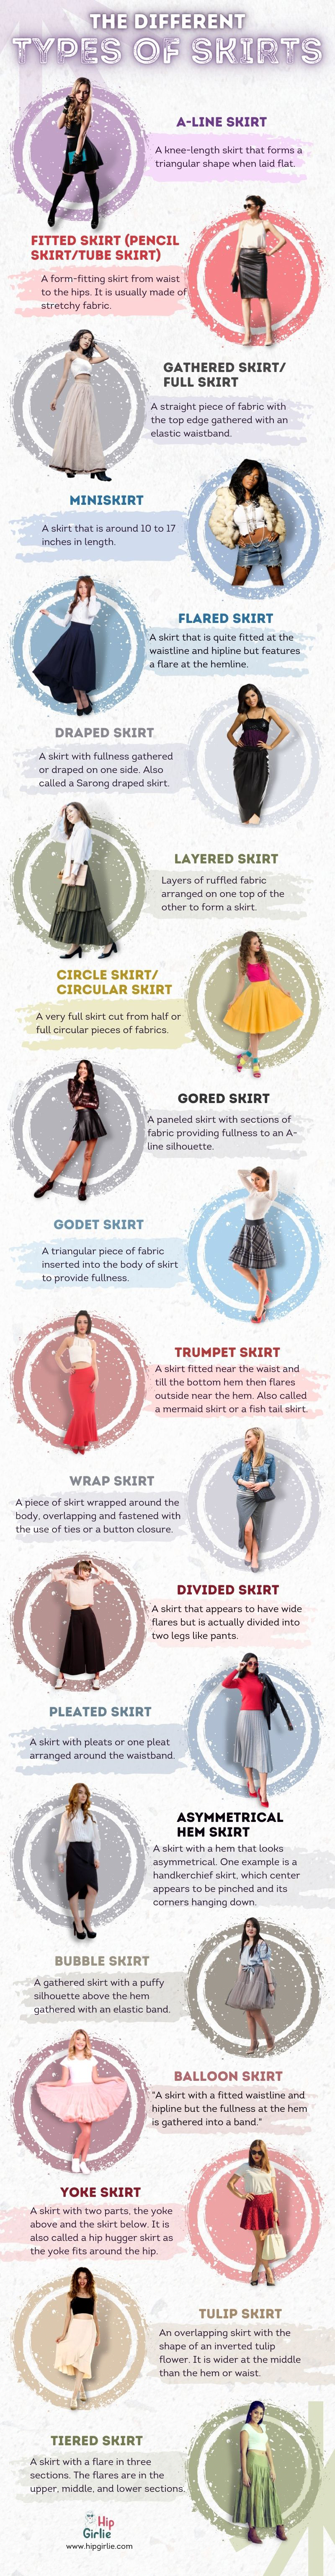 THE DIFFERENT TYPES OF SKIRTS